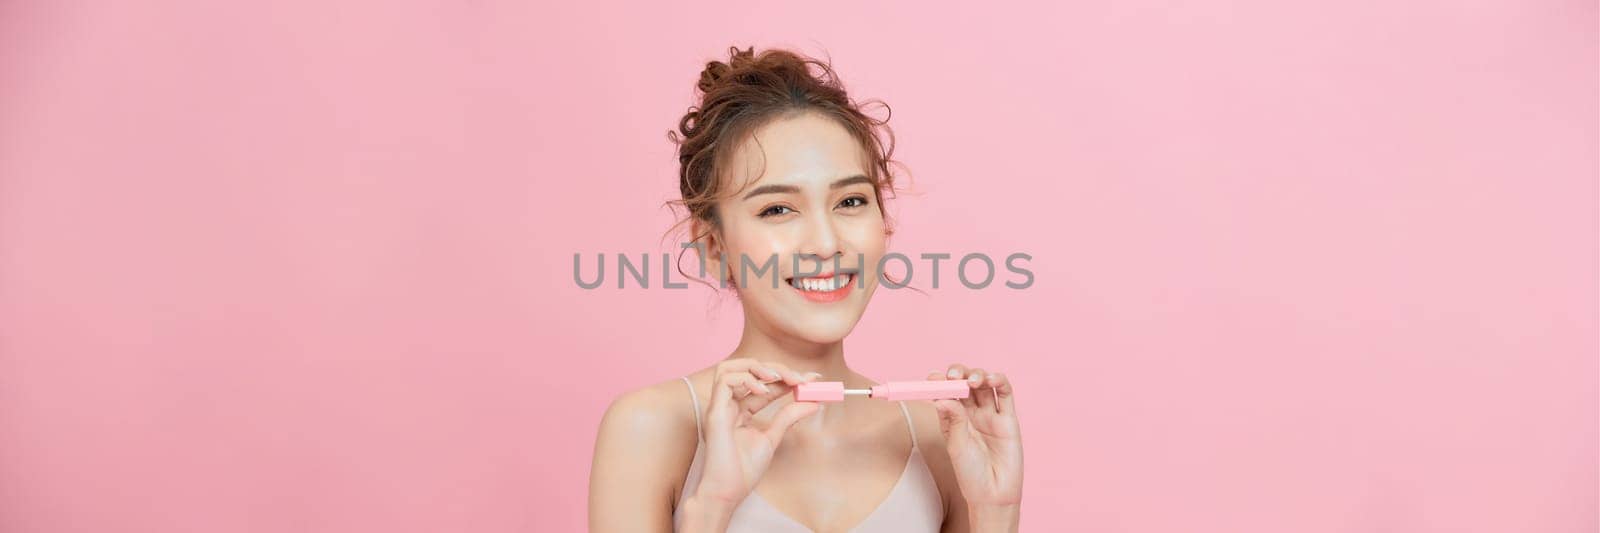 Photo of shirtless woman posing with lipstick, isolated studio background.